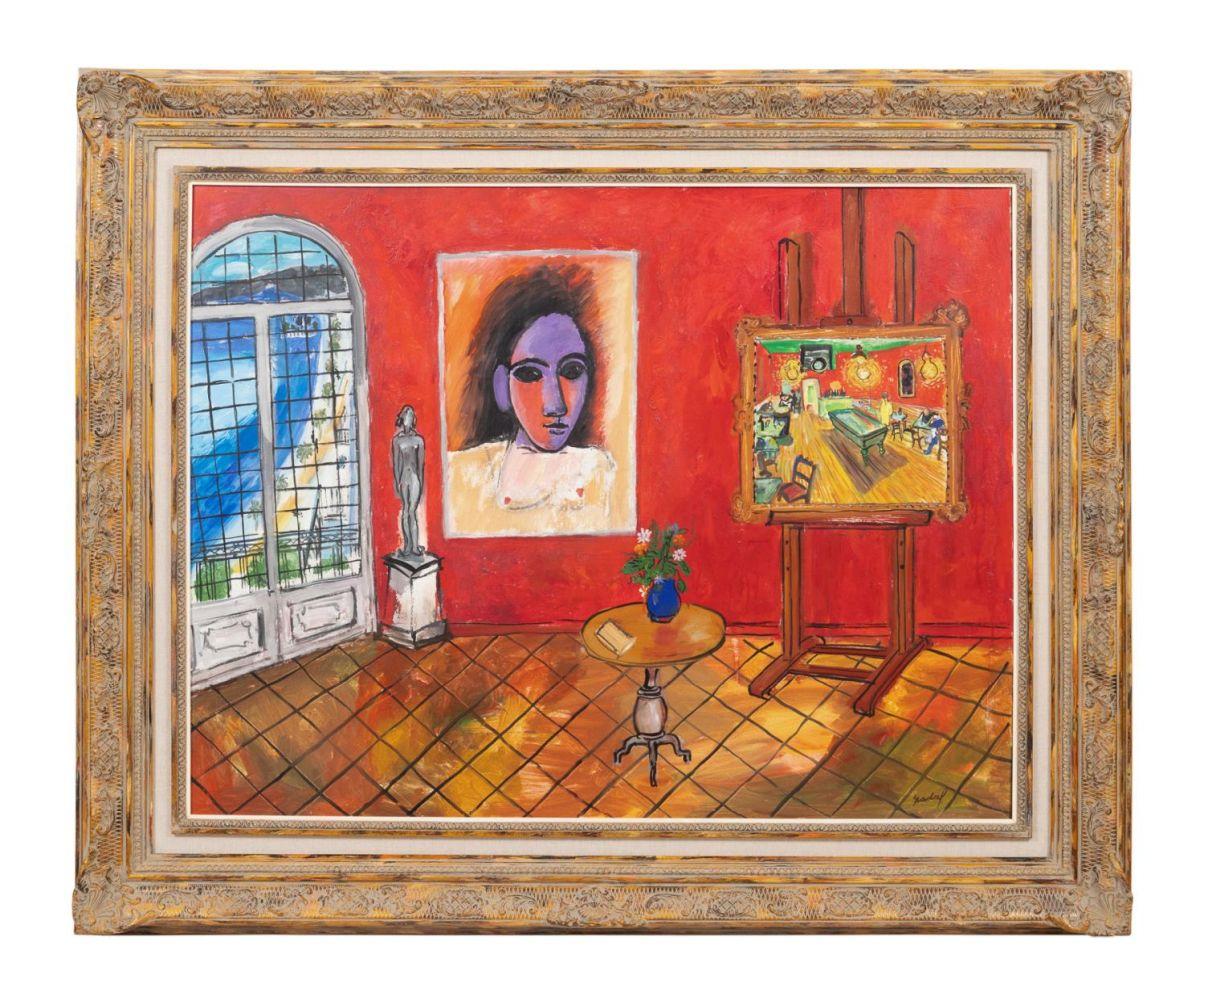 Oil on canvas painting by Carlos Nadal (French, 1917-1998), titled Salon Rojo, signed lower left and titled, signed and dated to verso, one of several works by Nadal in the auction (est. $25,000-$35,000).